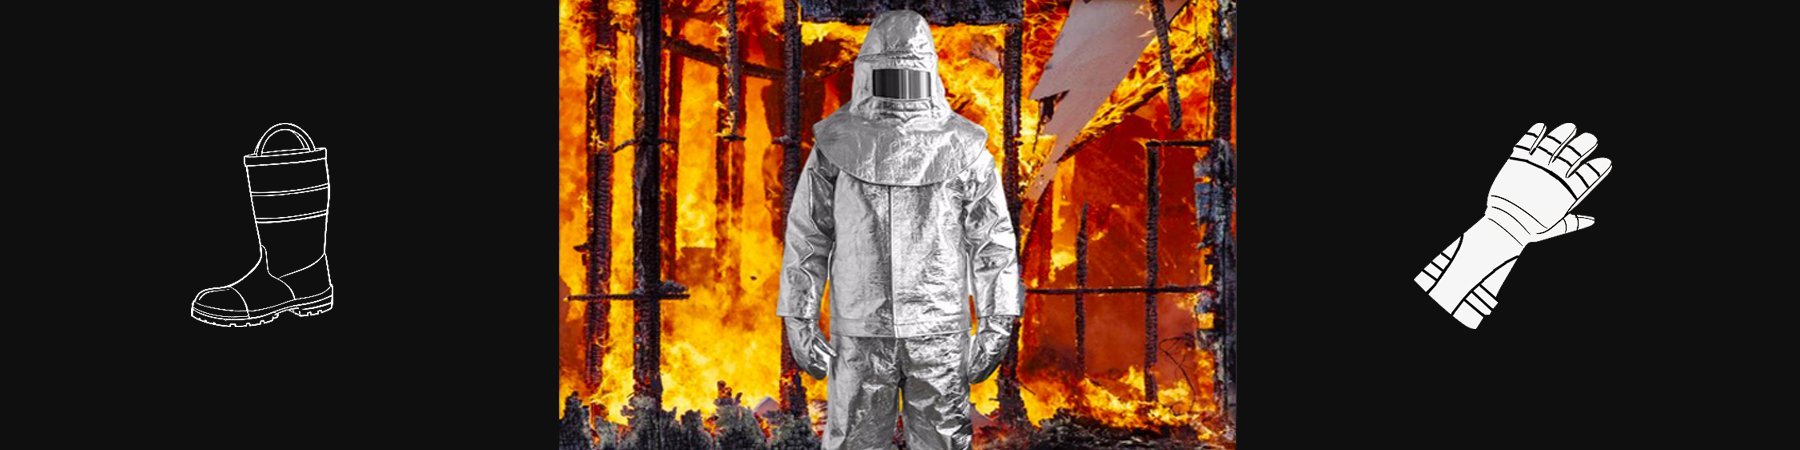 Fire Protective Apparel - Natural Disaster Survival Products